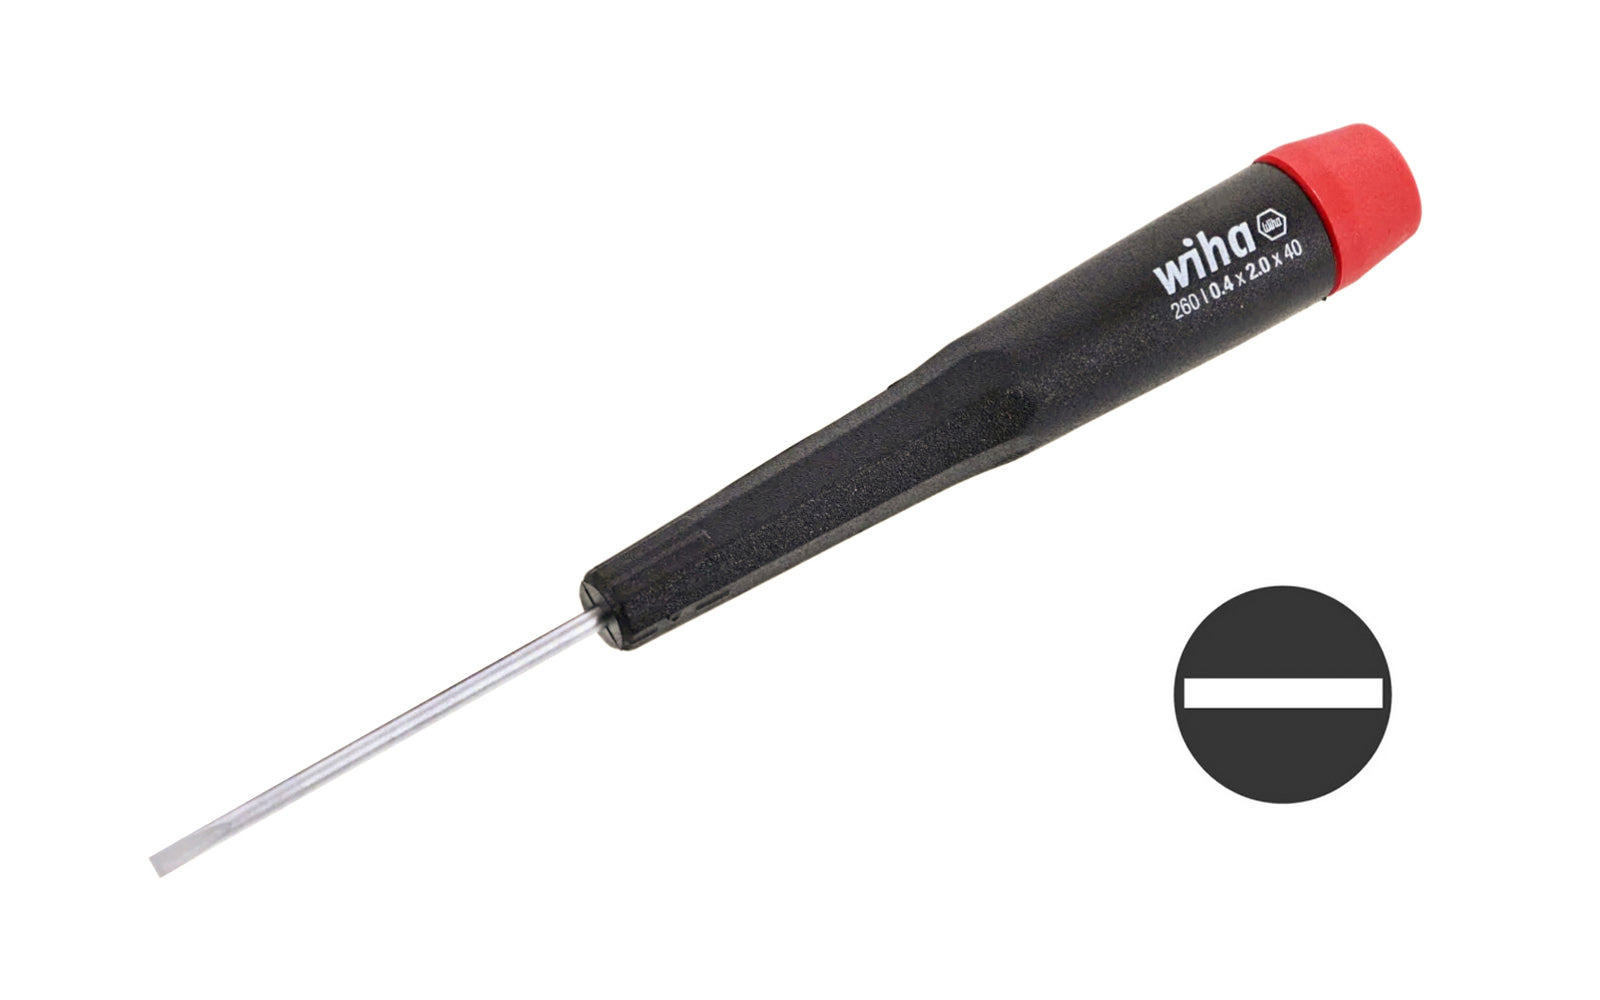 Wiha Slotted precision screwdriver made out of hardened CRM72 tool steel. Excellent for working on small components & modern electronics. Easy spin control cap. 0.8 x 40 mm, 1.0 x 40 mm, 1.2 x 40 mm, 1.5 x 40 mm, 1.8 x 40 mm, 2.0 x 40 mm, 2.5 x 50 mm, 3.0 x 50 mm, 3.5 x 60 mm, 4.0 x 60 mm sizes. Made in Germany. 